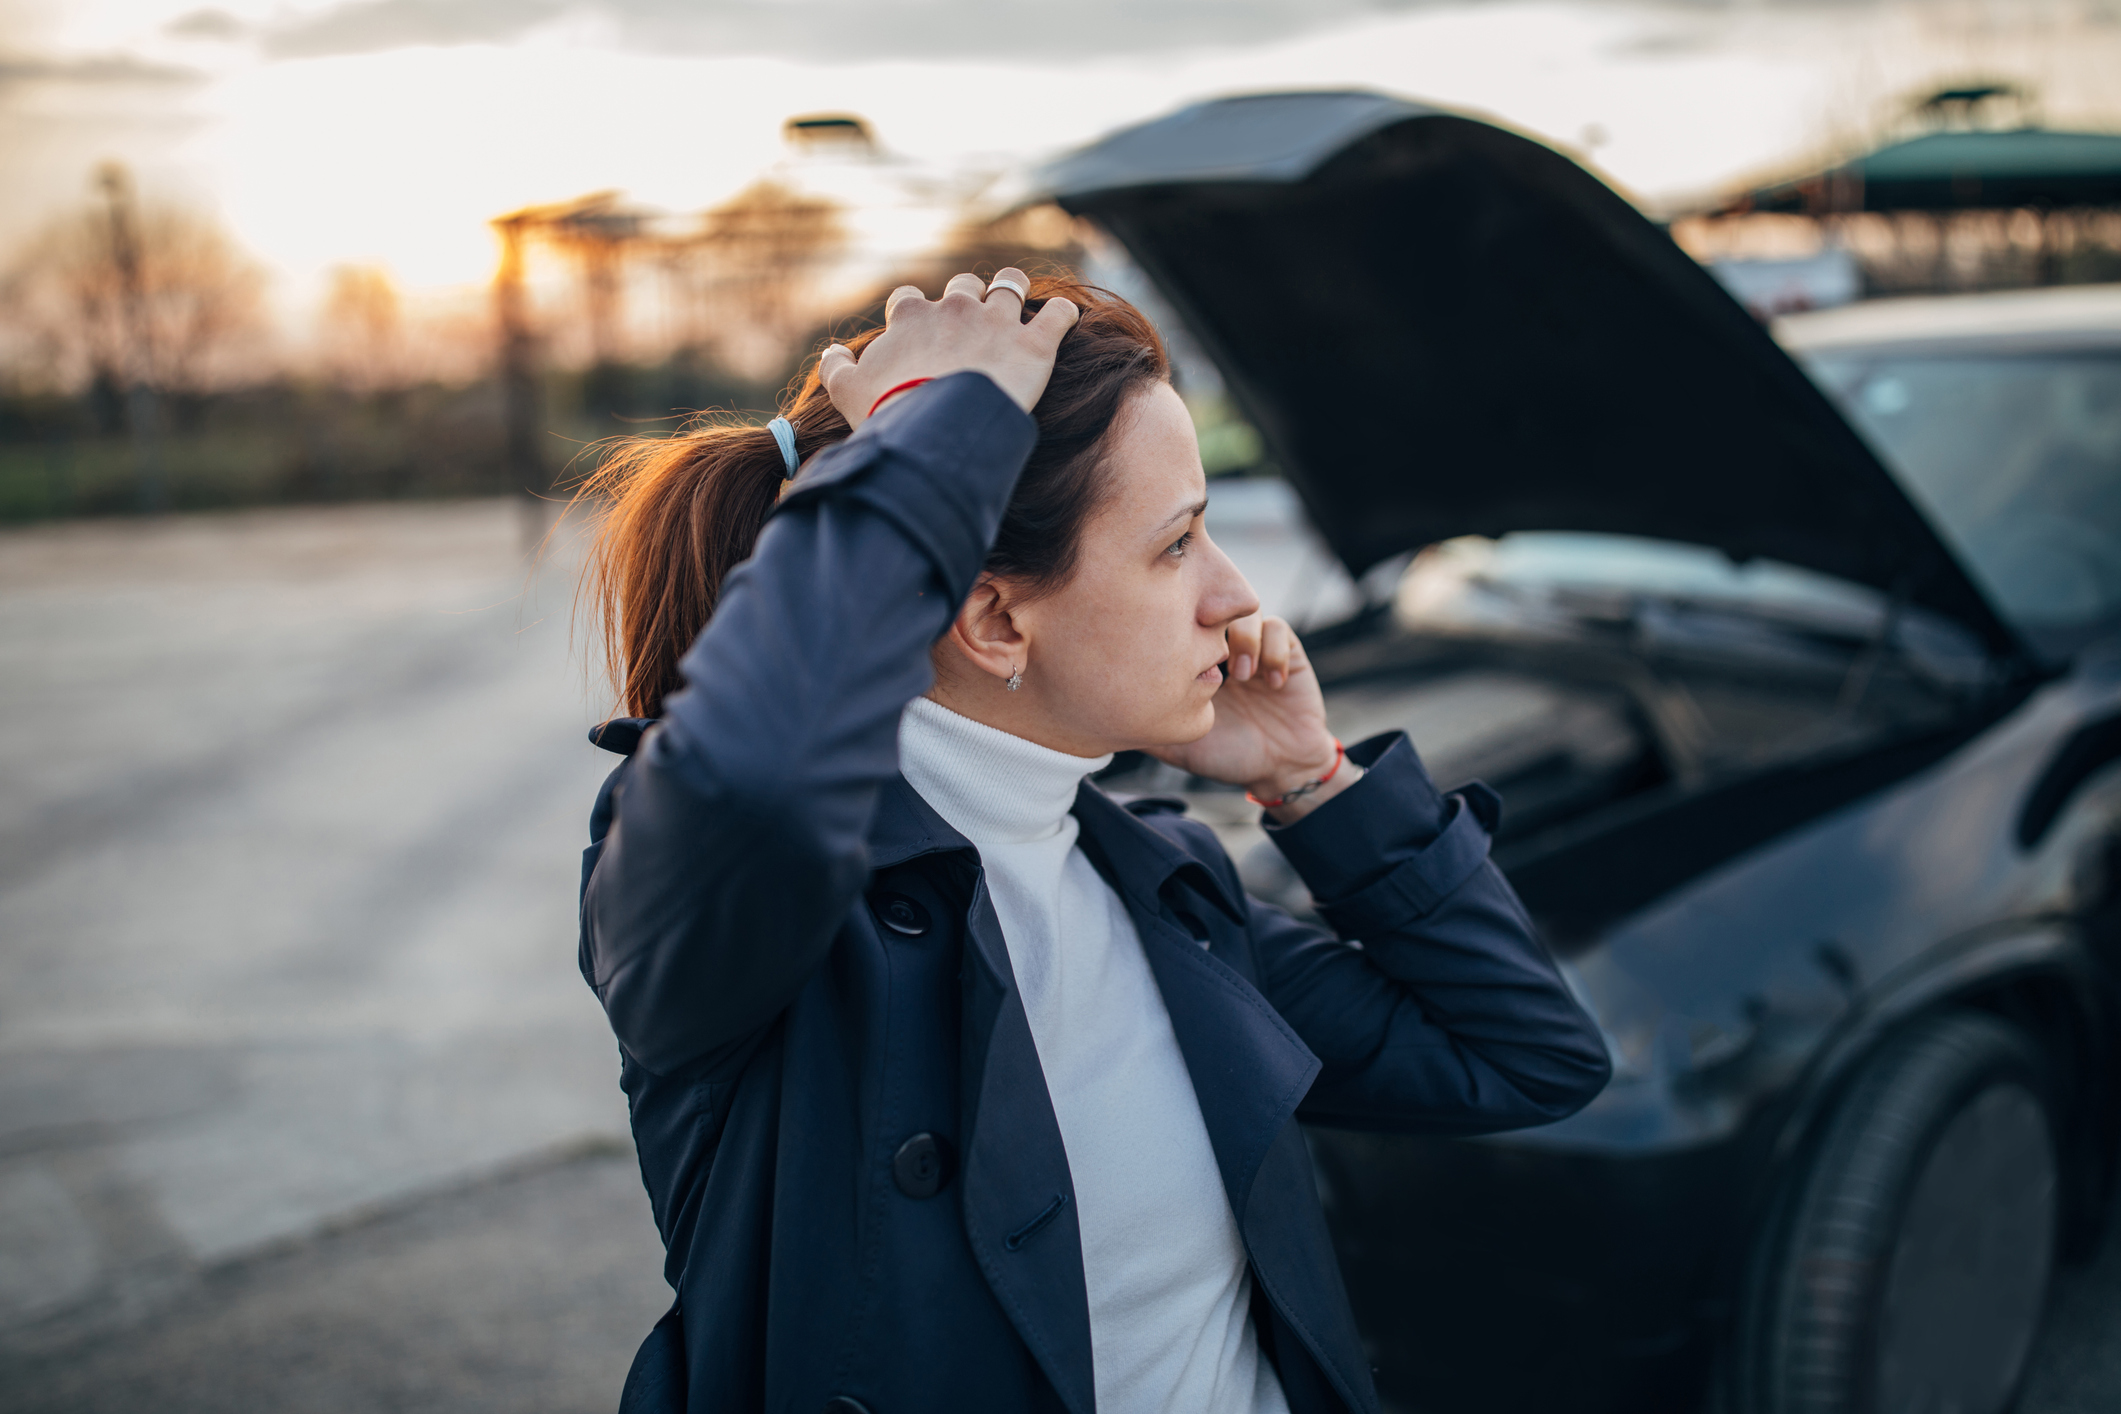 Sherman Law Firm discusses why car defects are still a major cause of accidents.